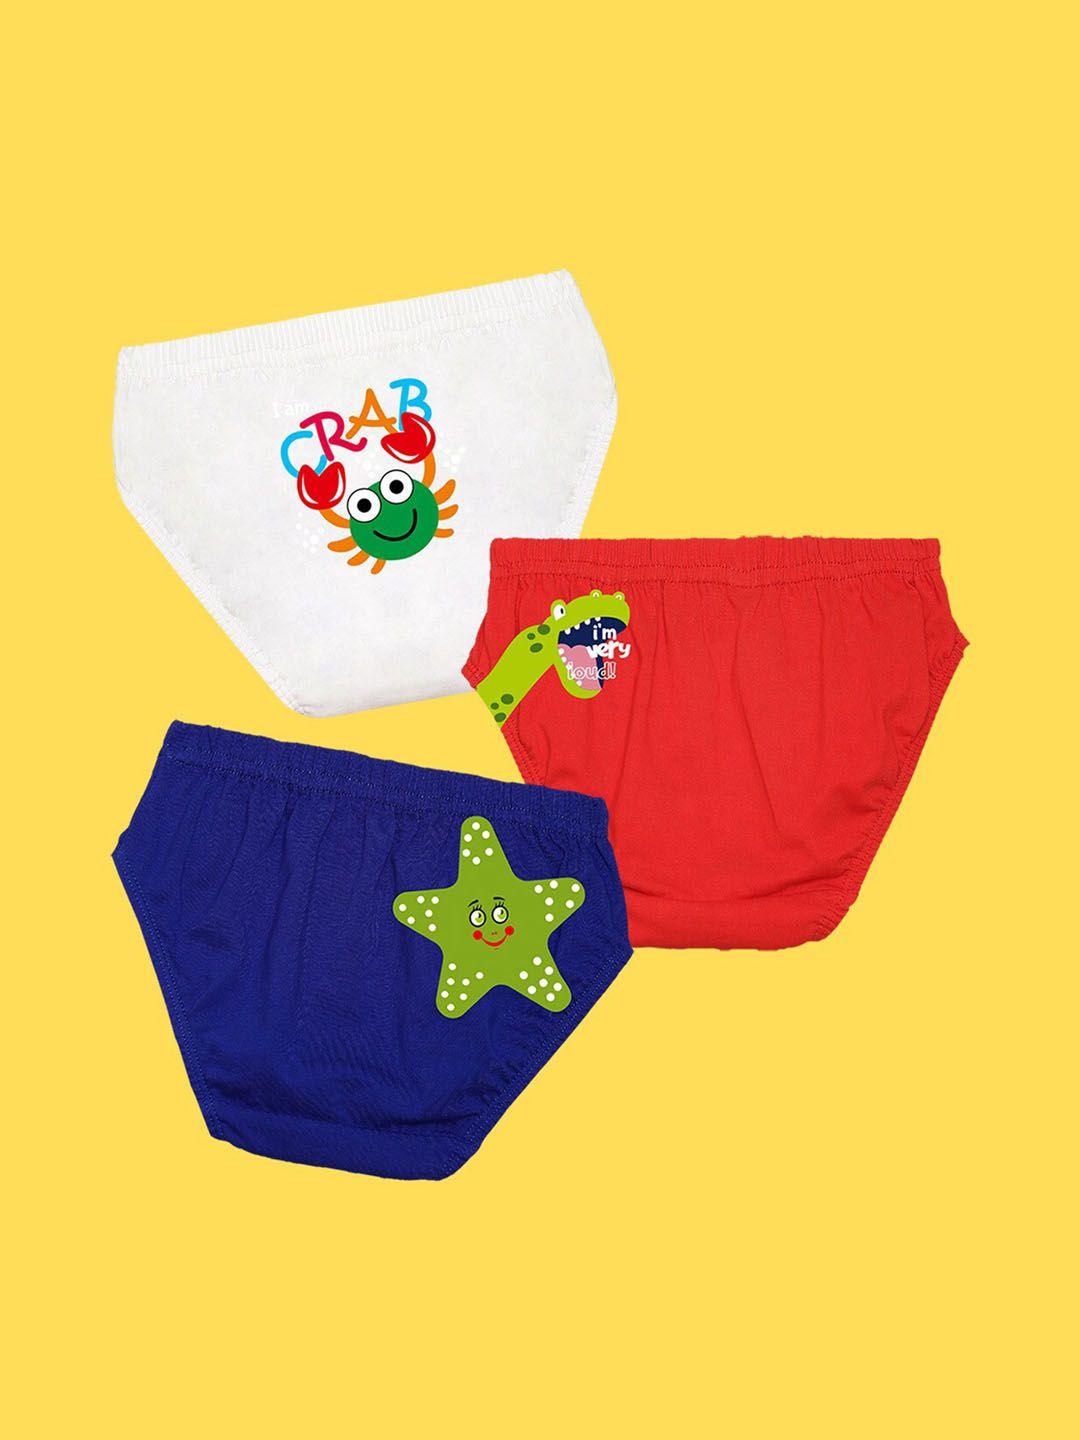 nusyl boys pack of 3 white,red,royal blue printed briefs